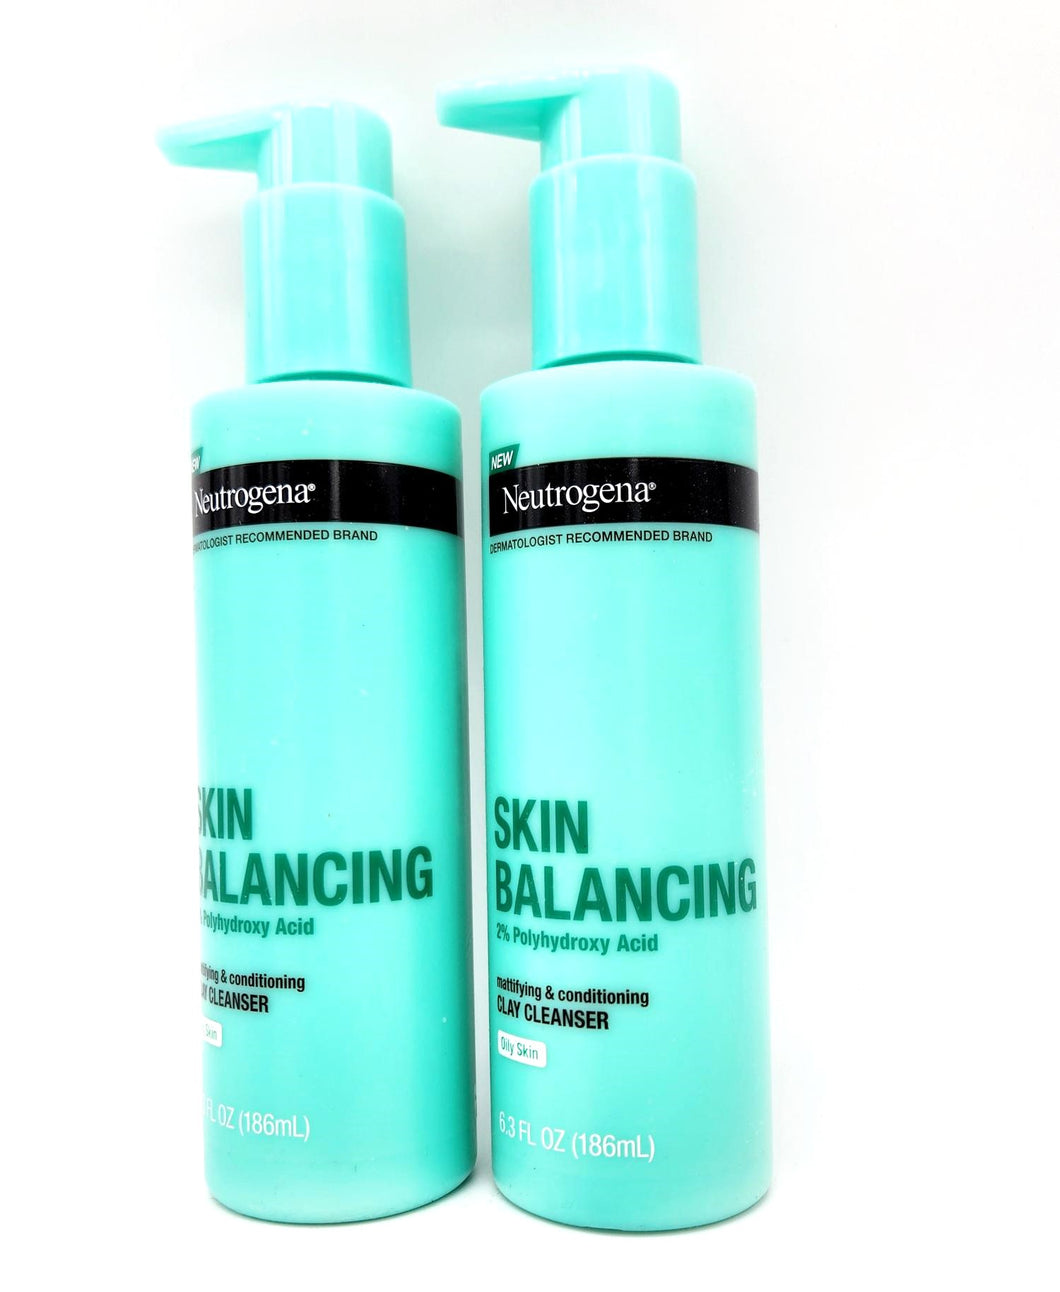 Neutrogena Skin balancing 2% Polyhydroxy Acid Clay Cleanser - Pack of 2